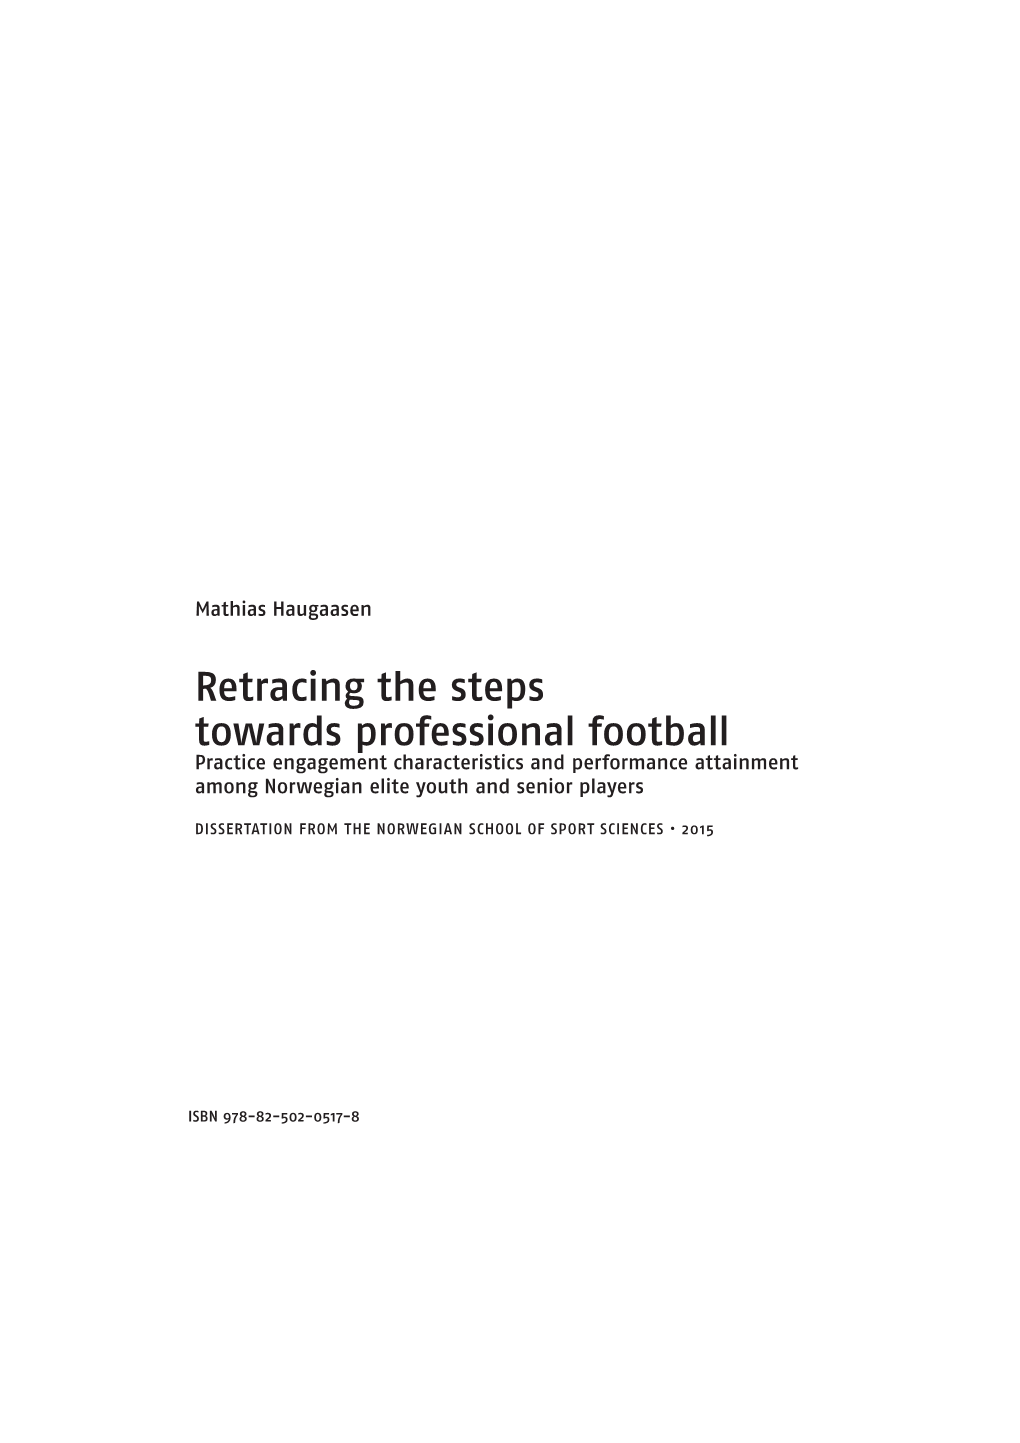 Retracing the Steps Towards Professional Football Practice Engagement Characteristics and Performance Attainment Among Norwegian Elite Youth and Senior Players